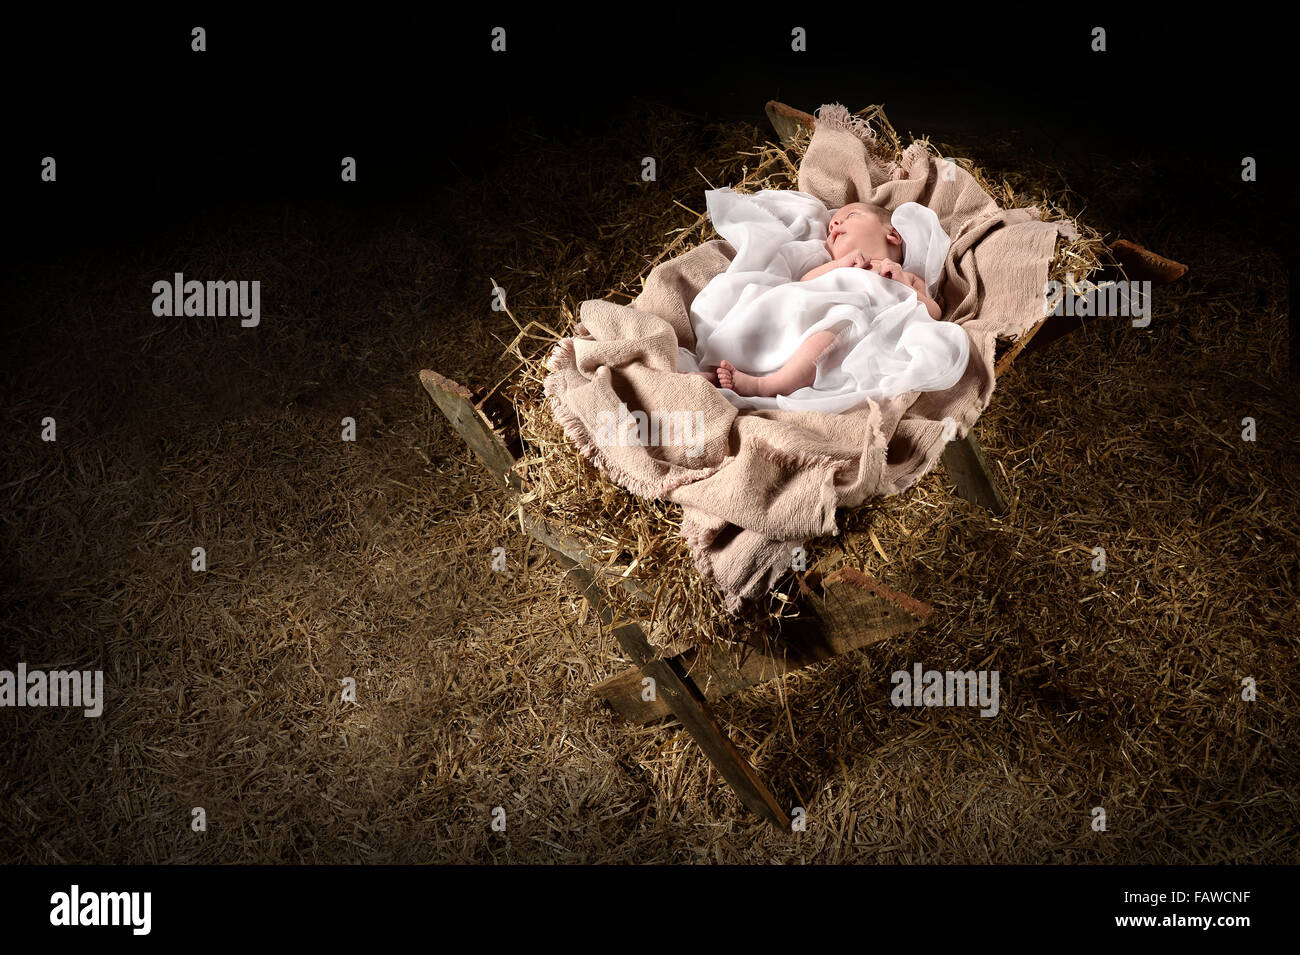 New born Jesus laying on a manger over dark background Stock Photo